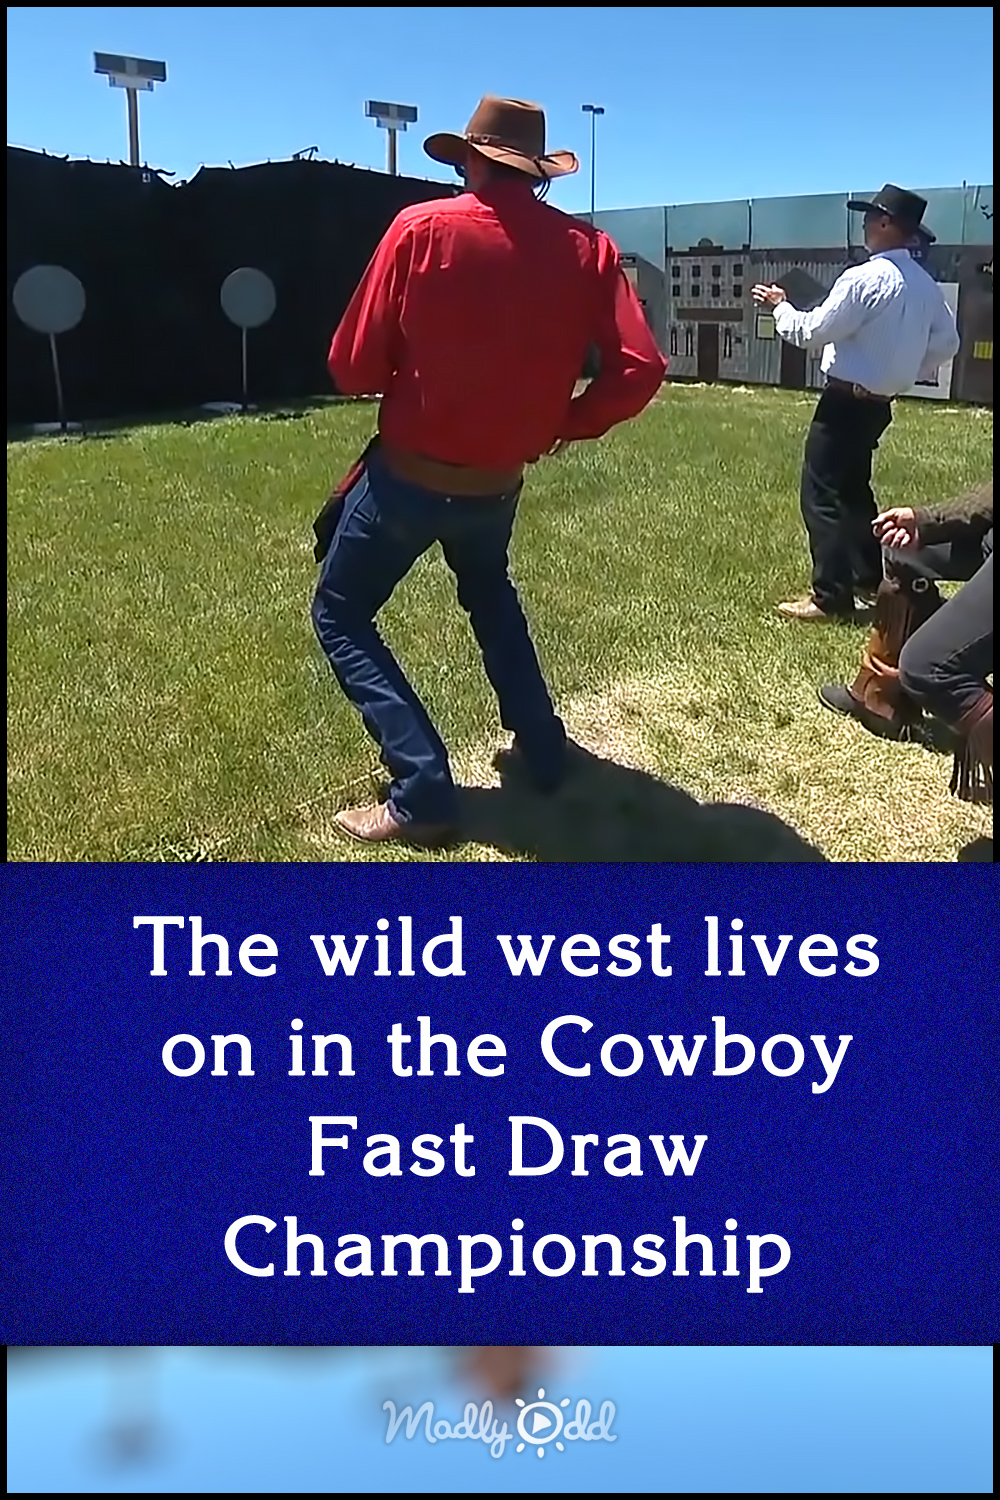 The wild west lives on in the Cowboy Fast Draw Championship